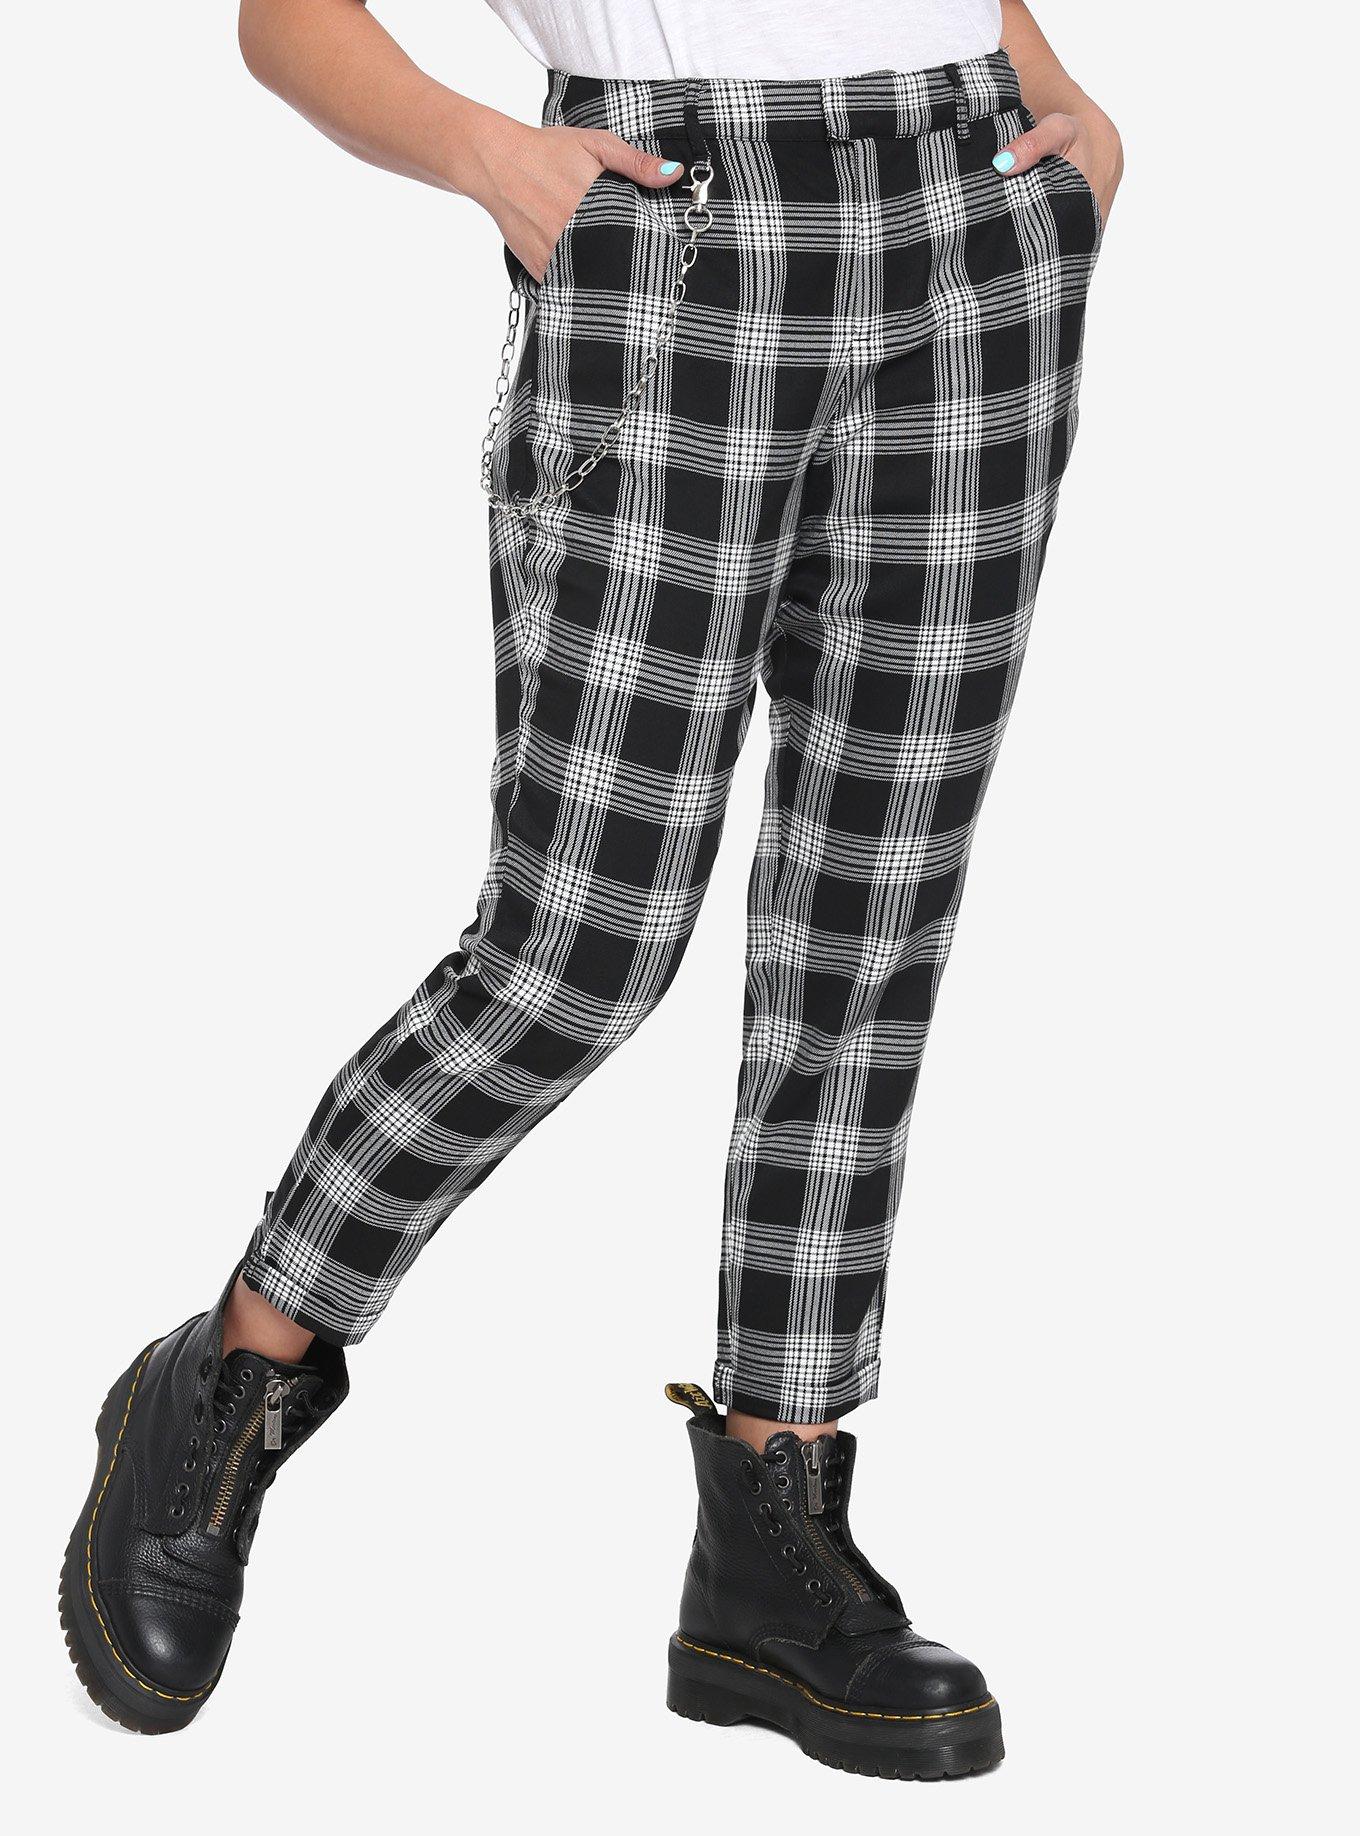 Hot Topic Plaid Pants With Chain Black Size XXL - $15 (55% Off